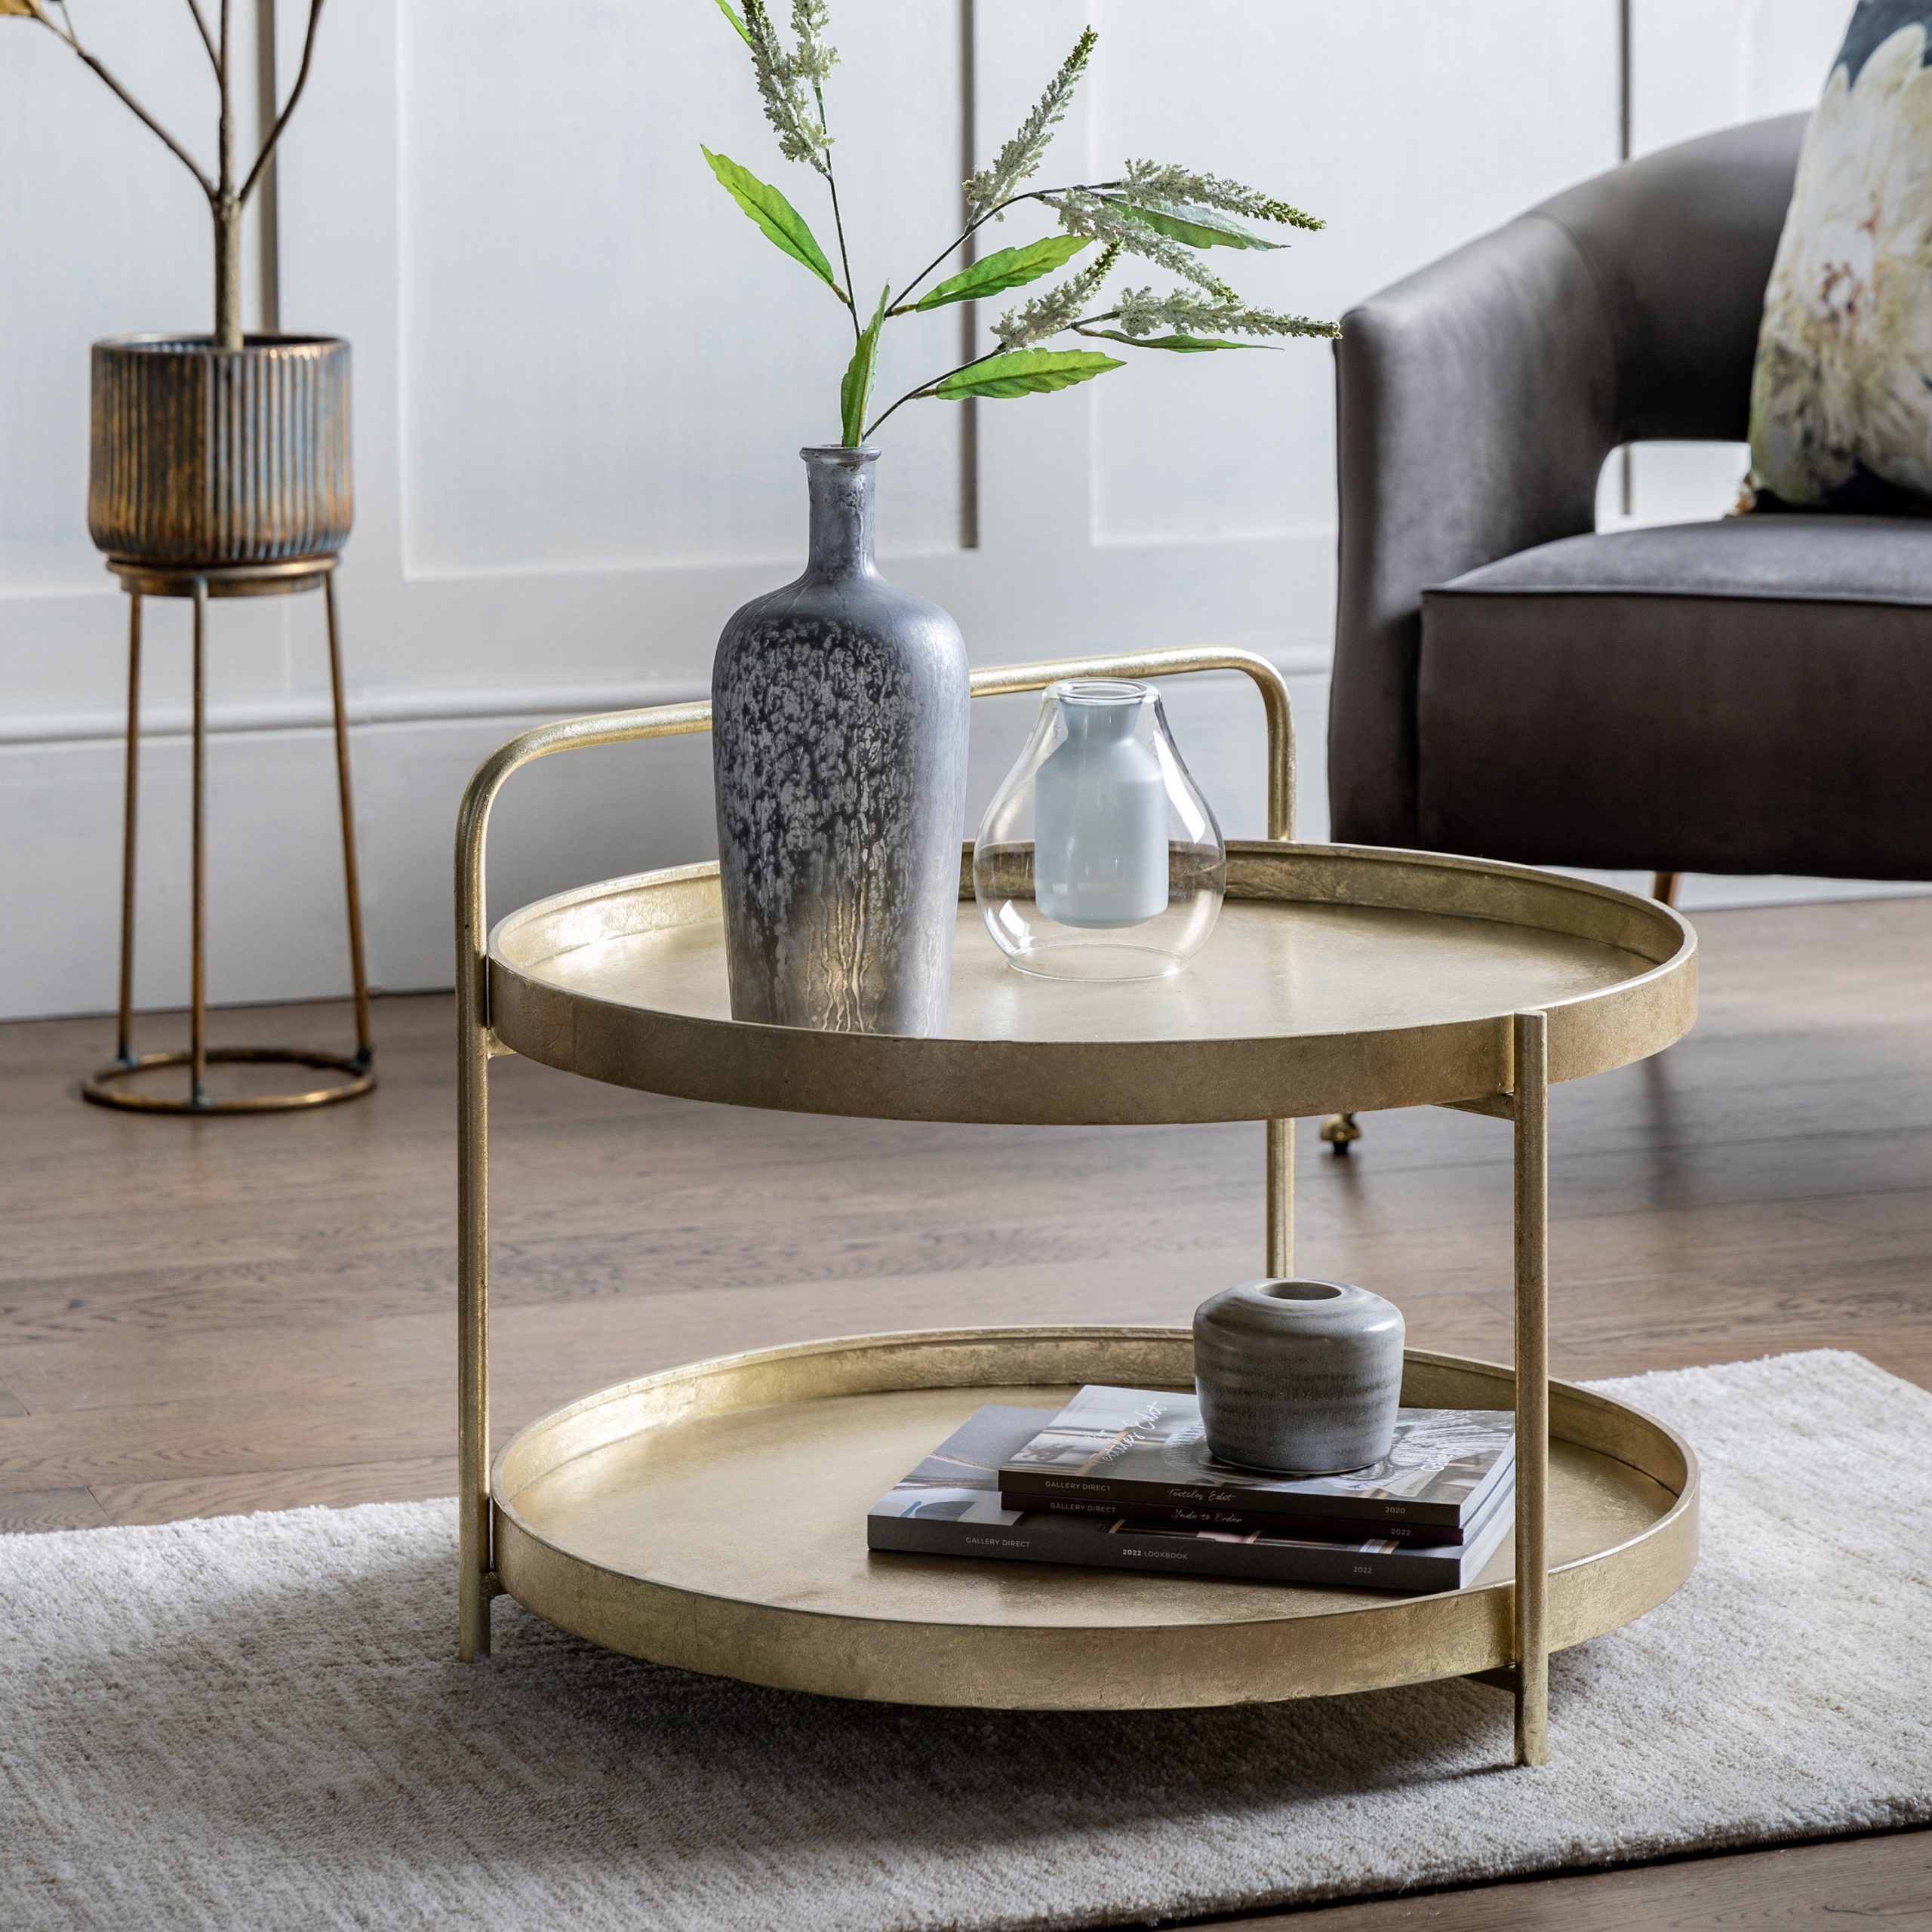 Gallery Direct 3 Legs Coffee Table With Storage & Reviews | Wayfair.co.uk Regarding Glass Coffee Tables With Lower Shelves (Photo 11 of 15)